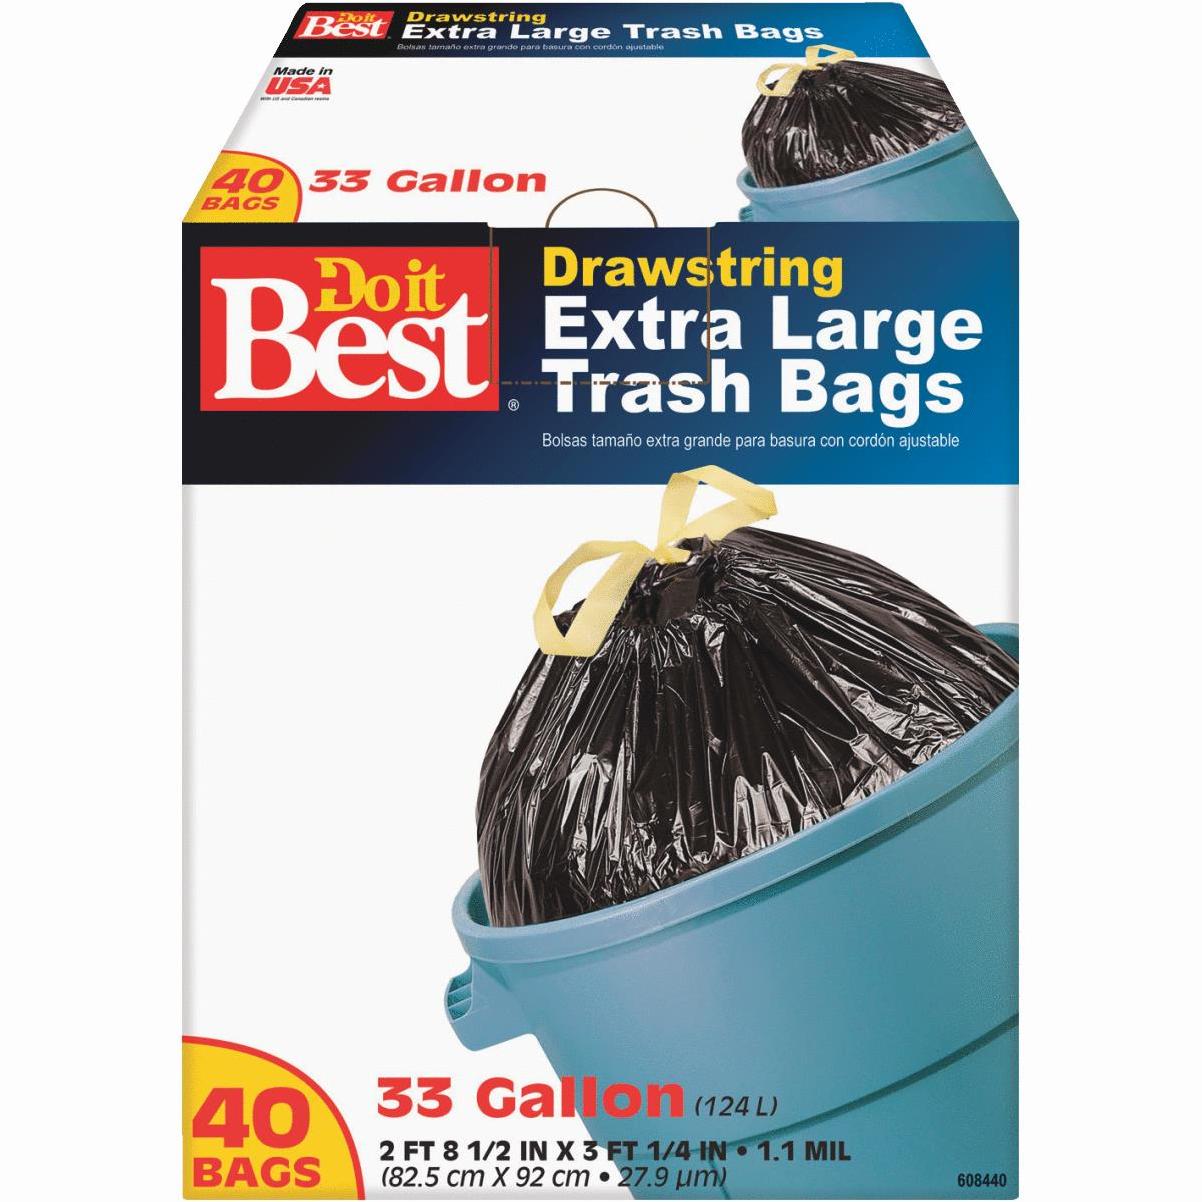 Hefty Strong Extra Large Trash Bags, 33 Gallon, 20 Ct